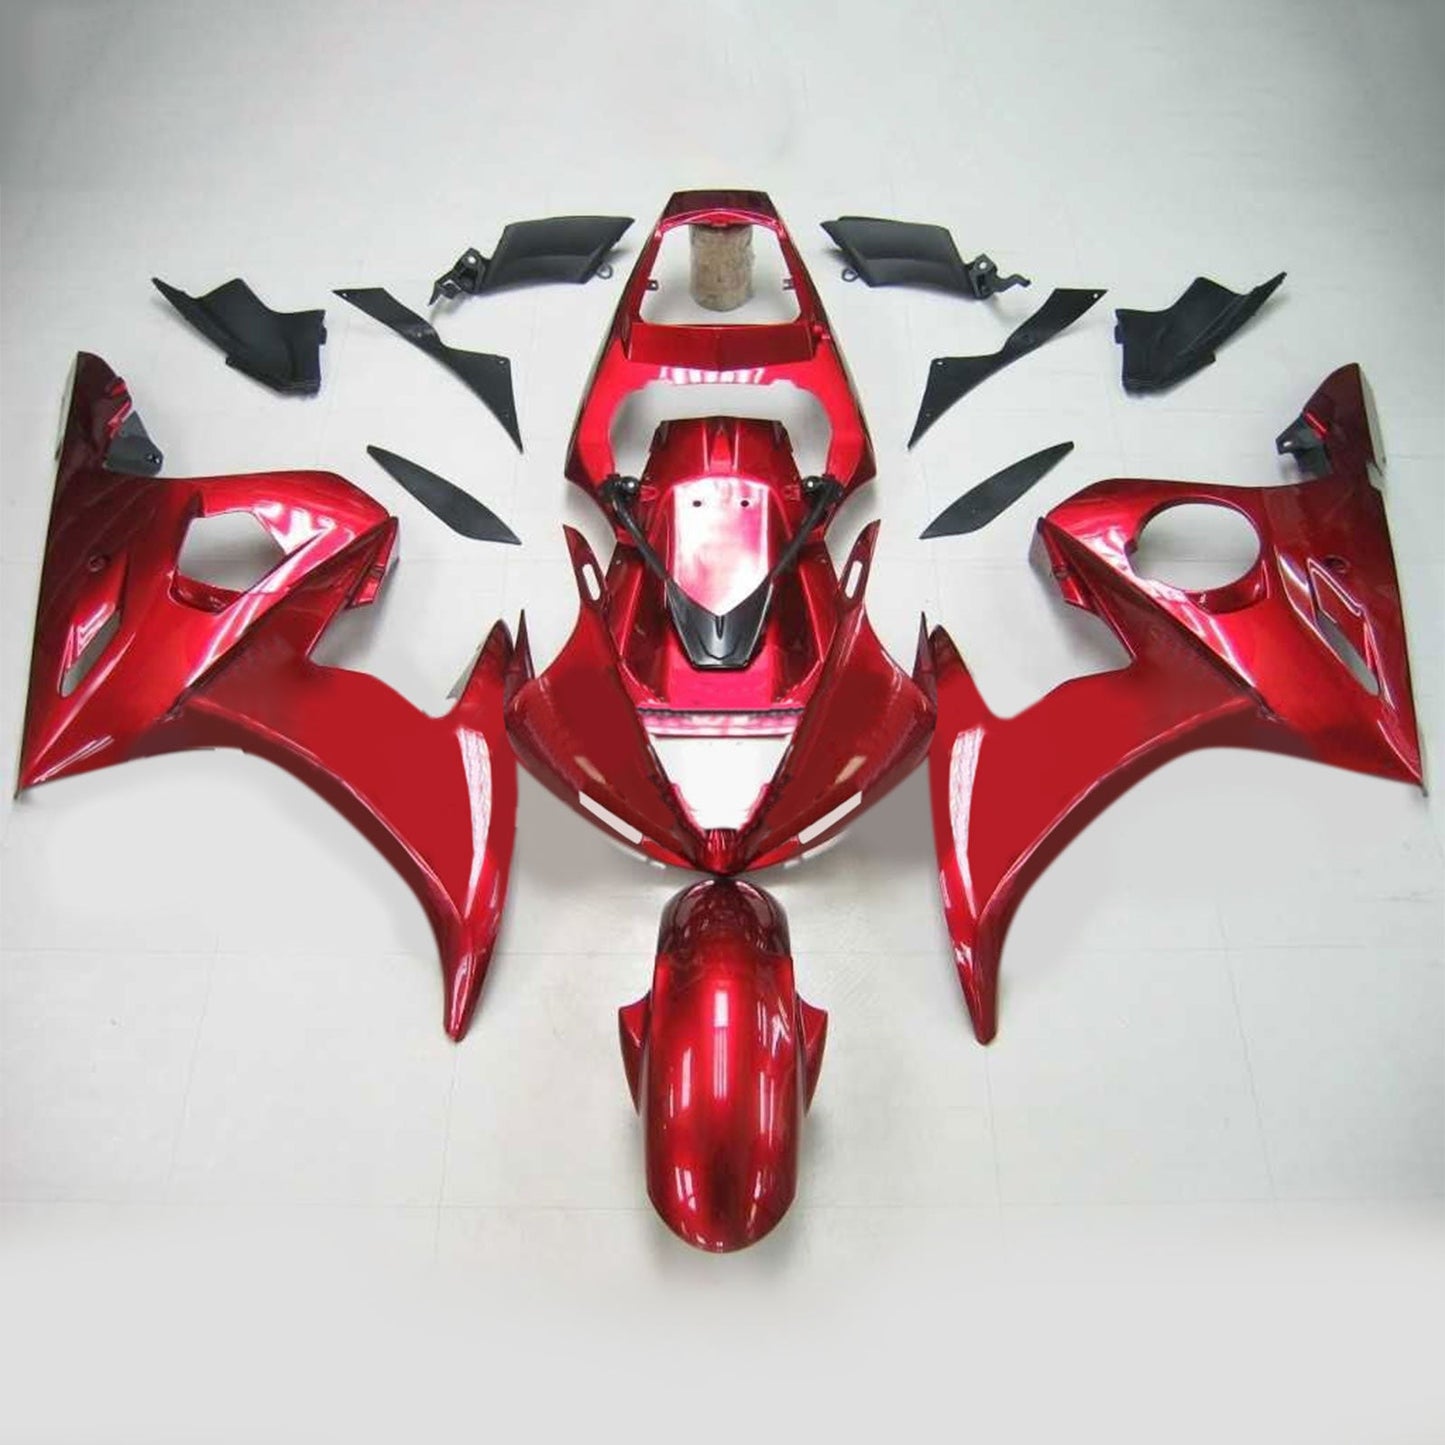 Amotopart Yamaha 2005 YZF 600 R6 Gloss Red Fearing Kit